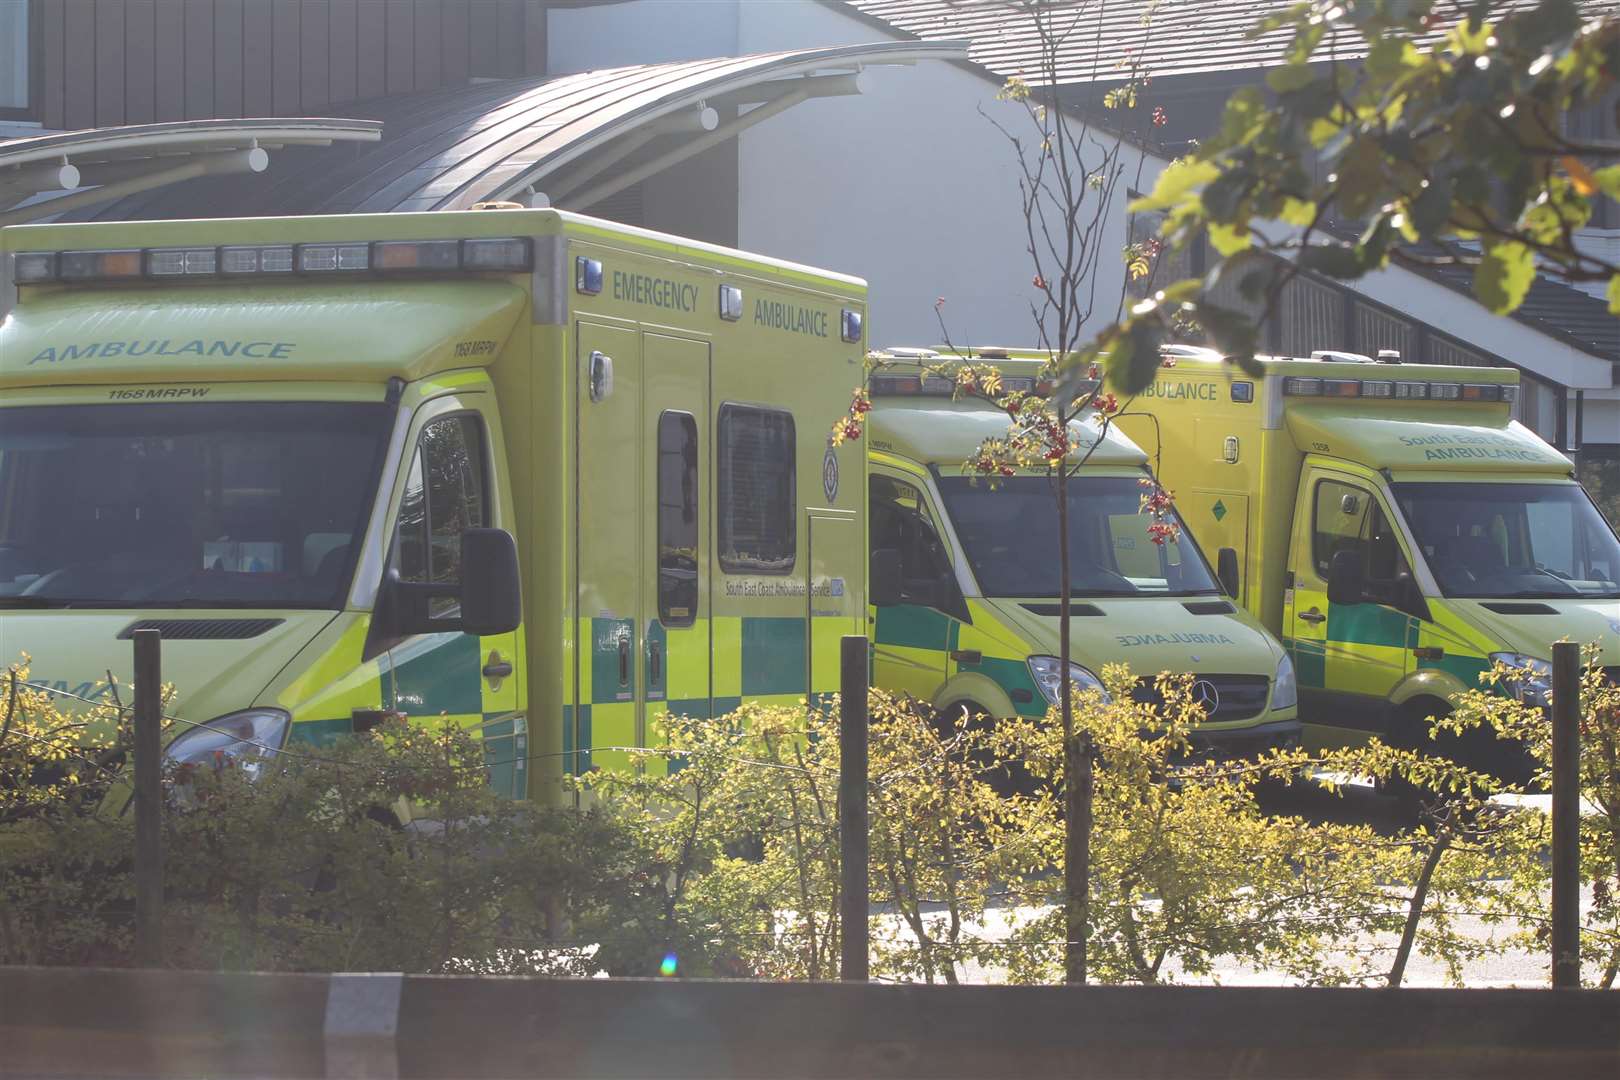 SECAmb remains in special measures after inspectors ruled the trust requires improvement